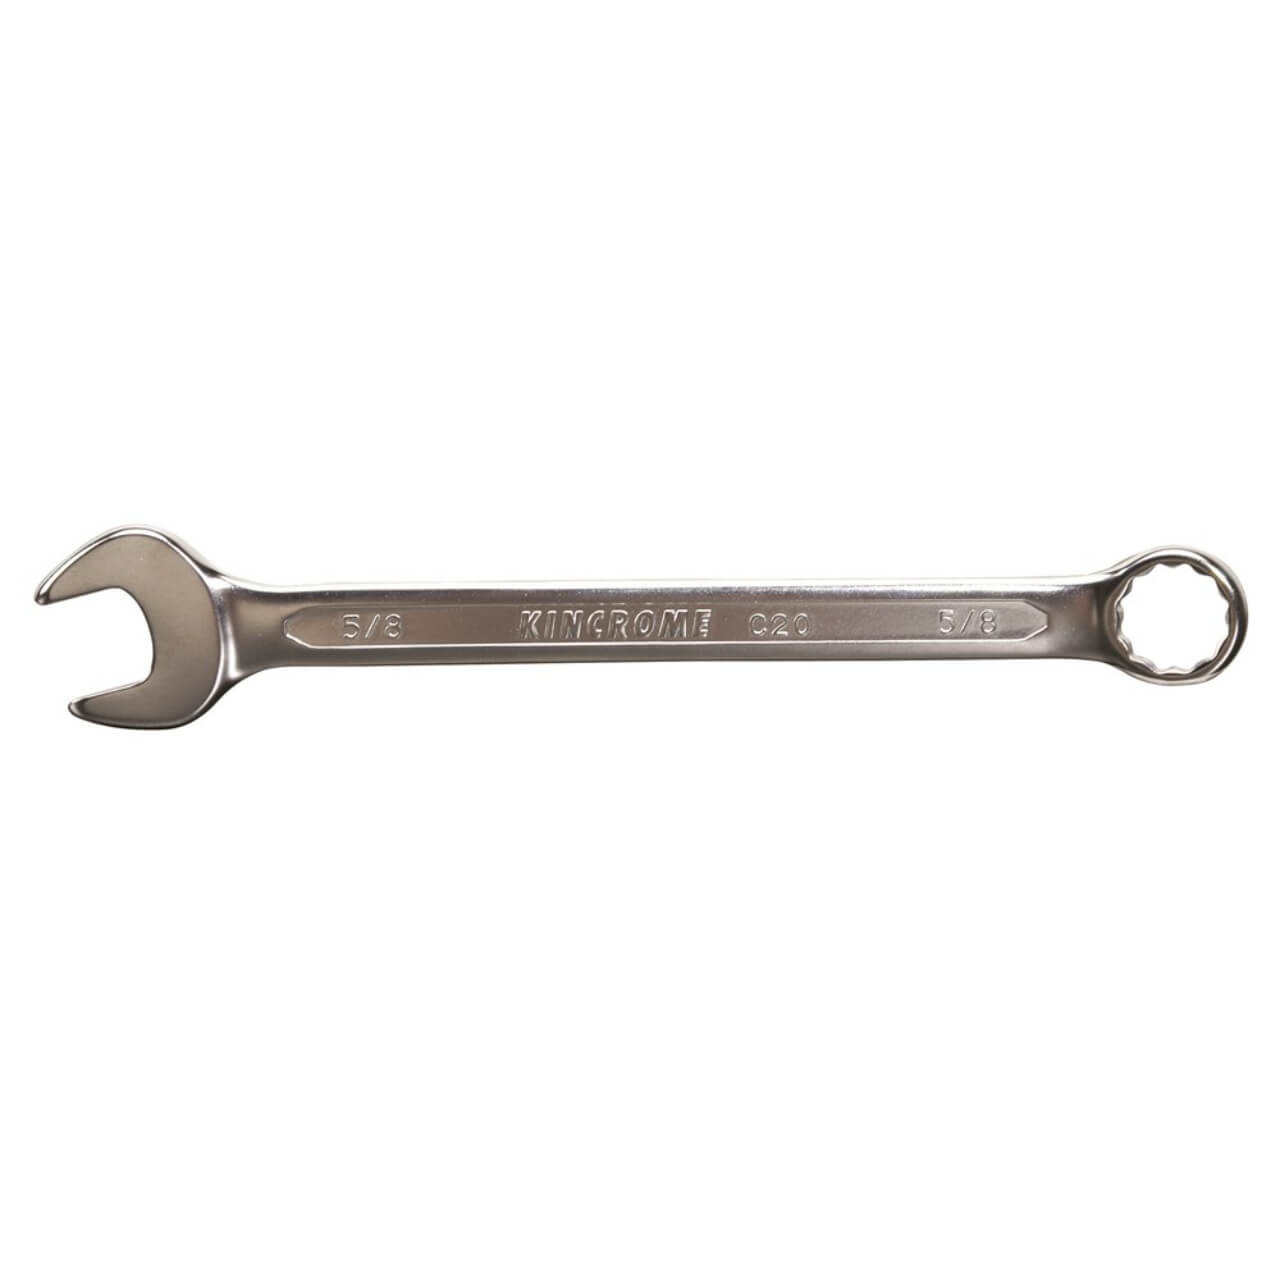 Kincrome 32mm Combination ROE Spanner Metric